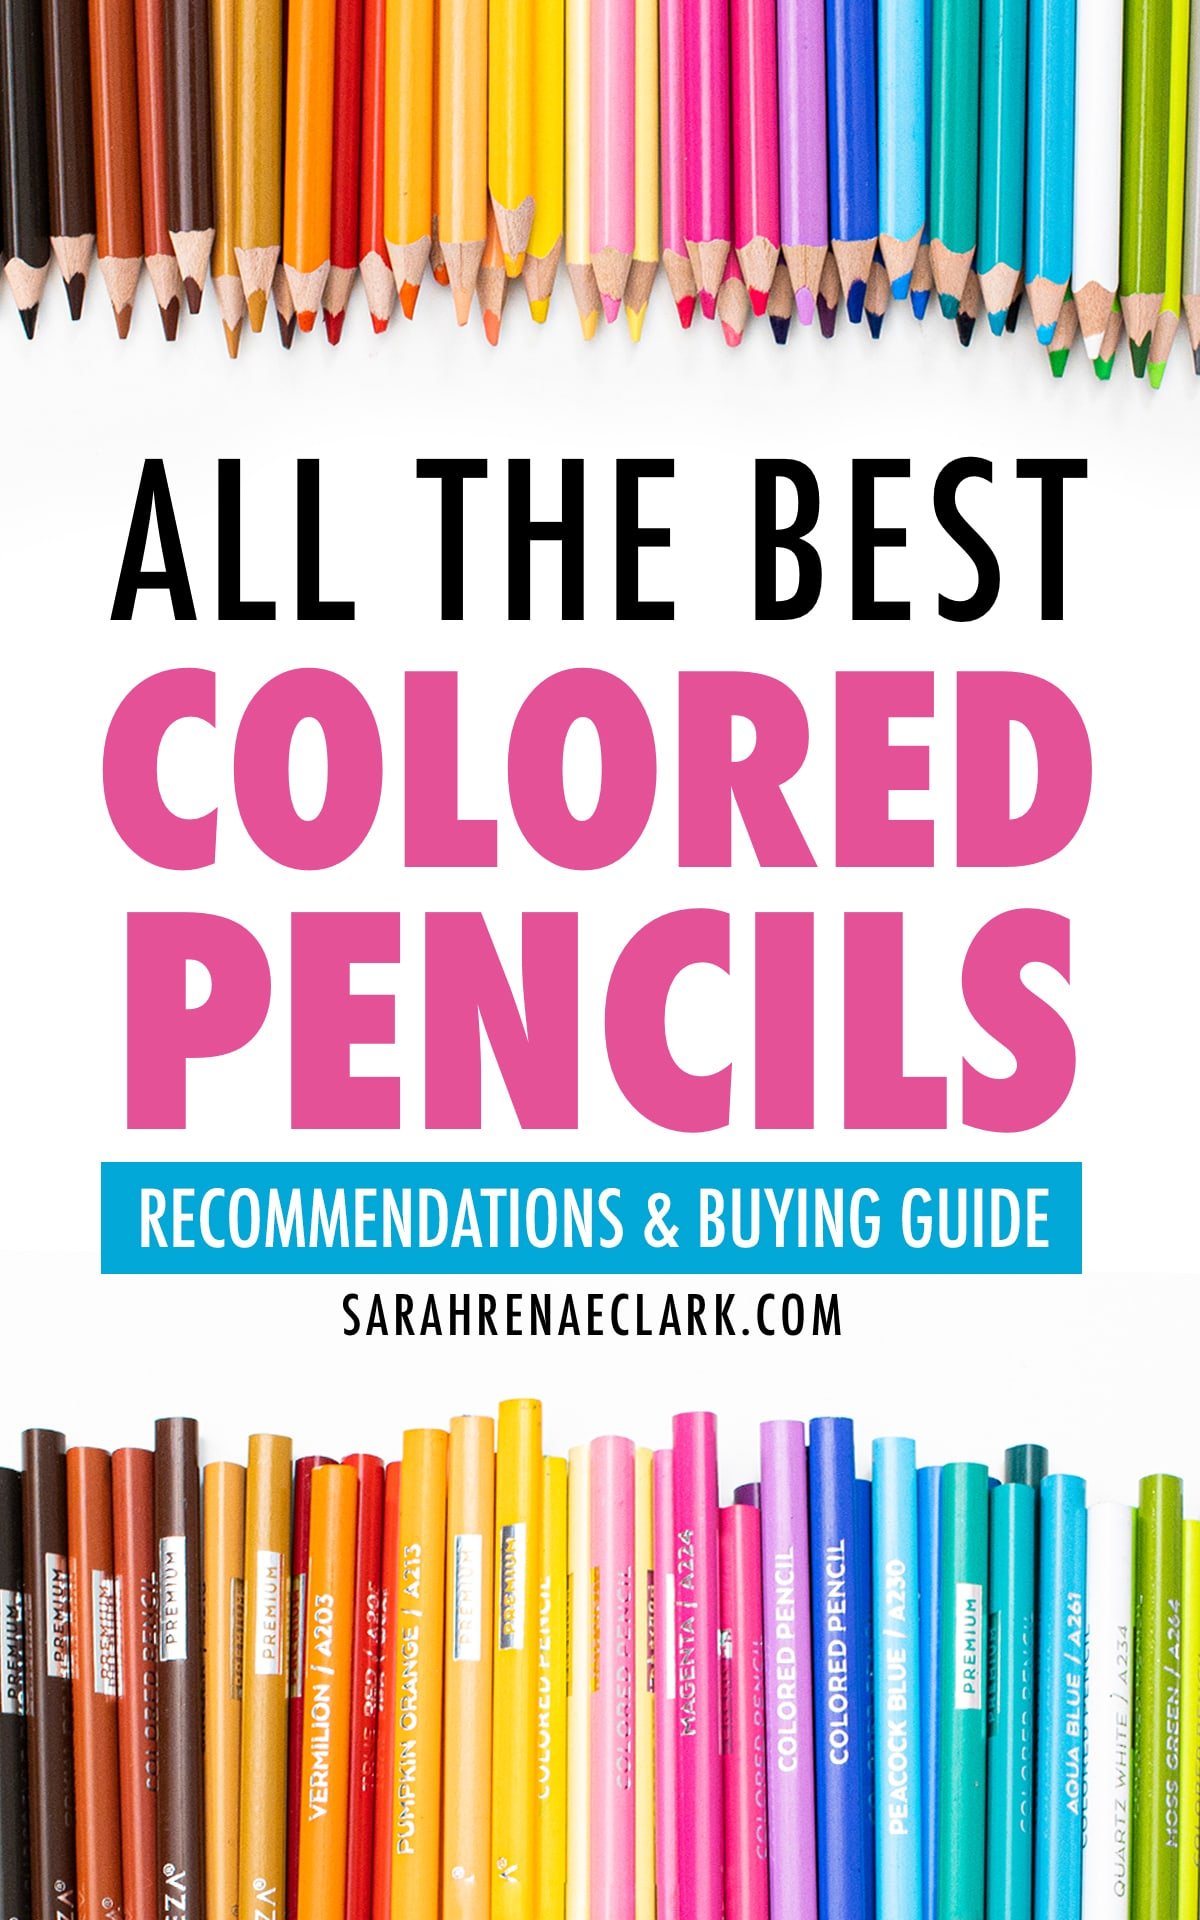 All The Best Colored Pencil Recommendations & Buying Guide